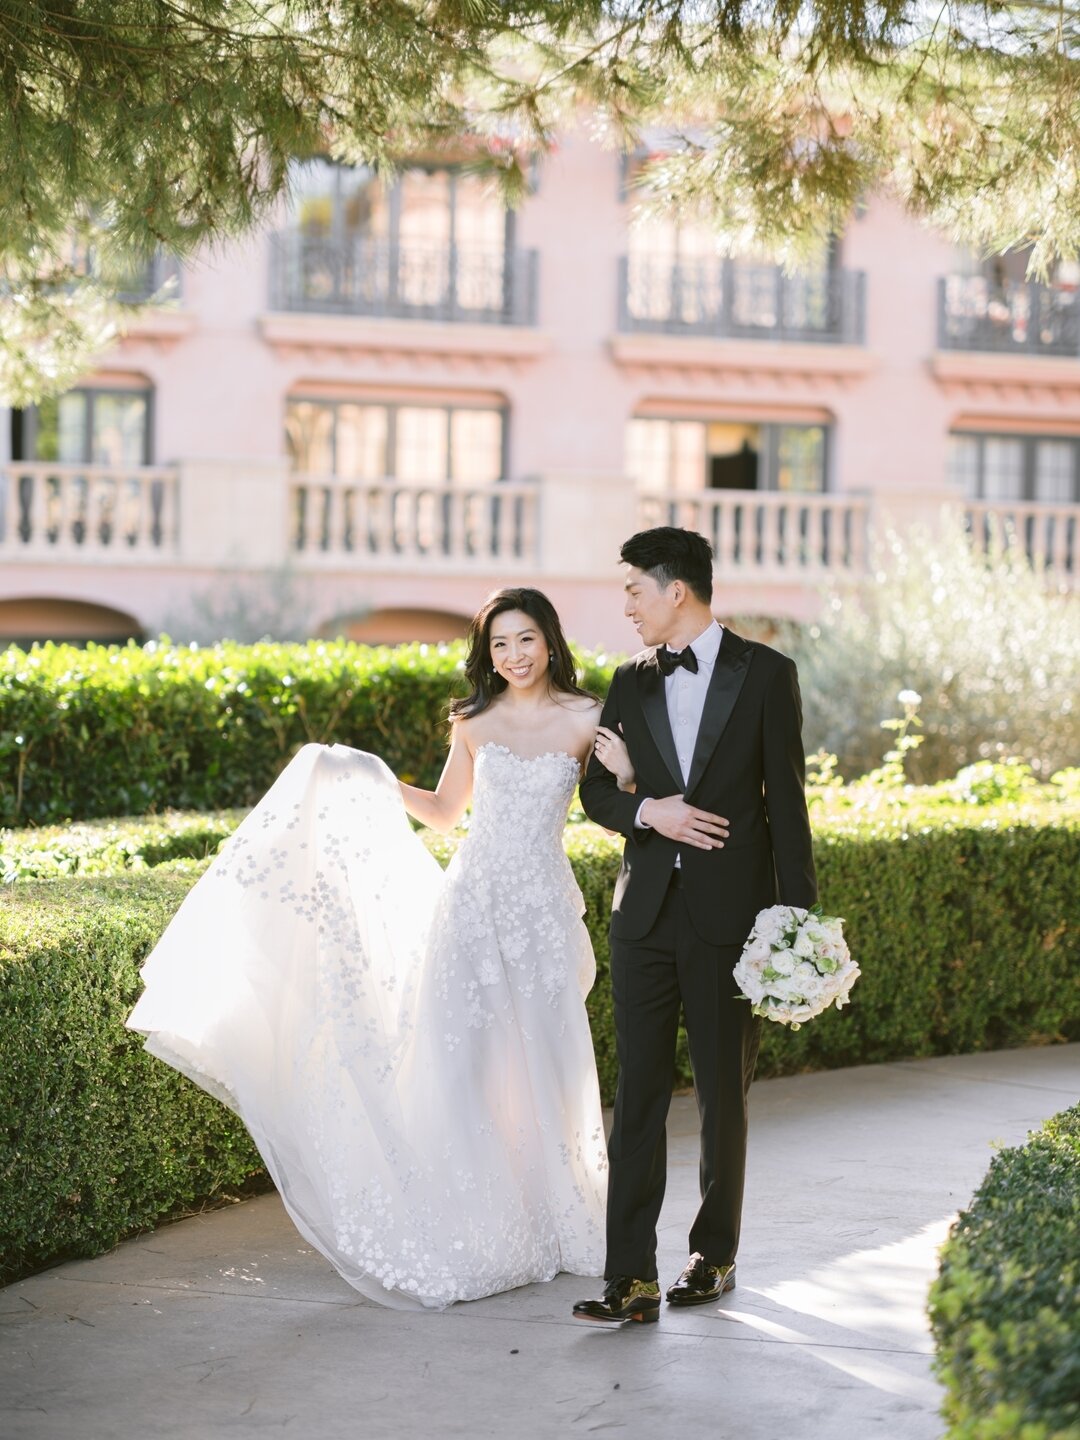 When planning their @Fairmontgranddelmar wedding day, Michelle and Nathan were very intentional with each aspect of the celebration. Perhaps, the most important thing to them, however, was creating an experience for their guests that would express ju